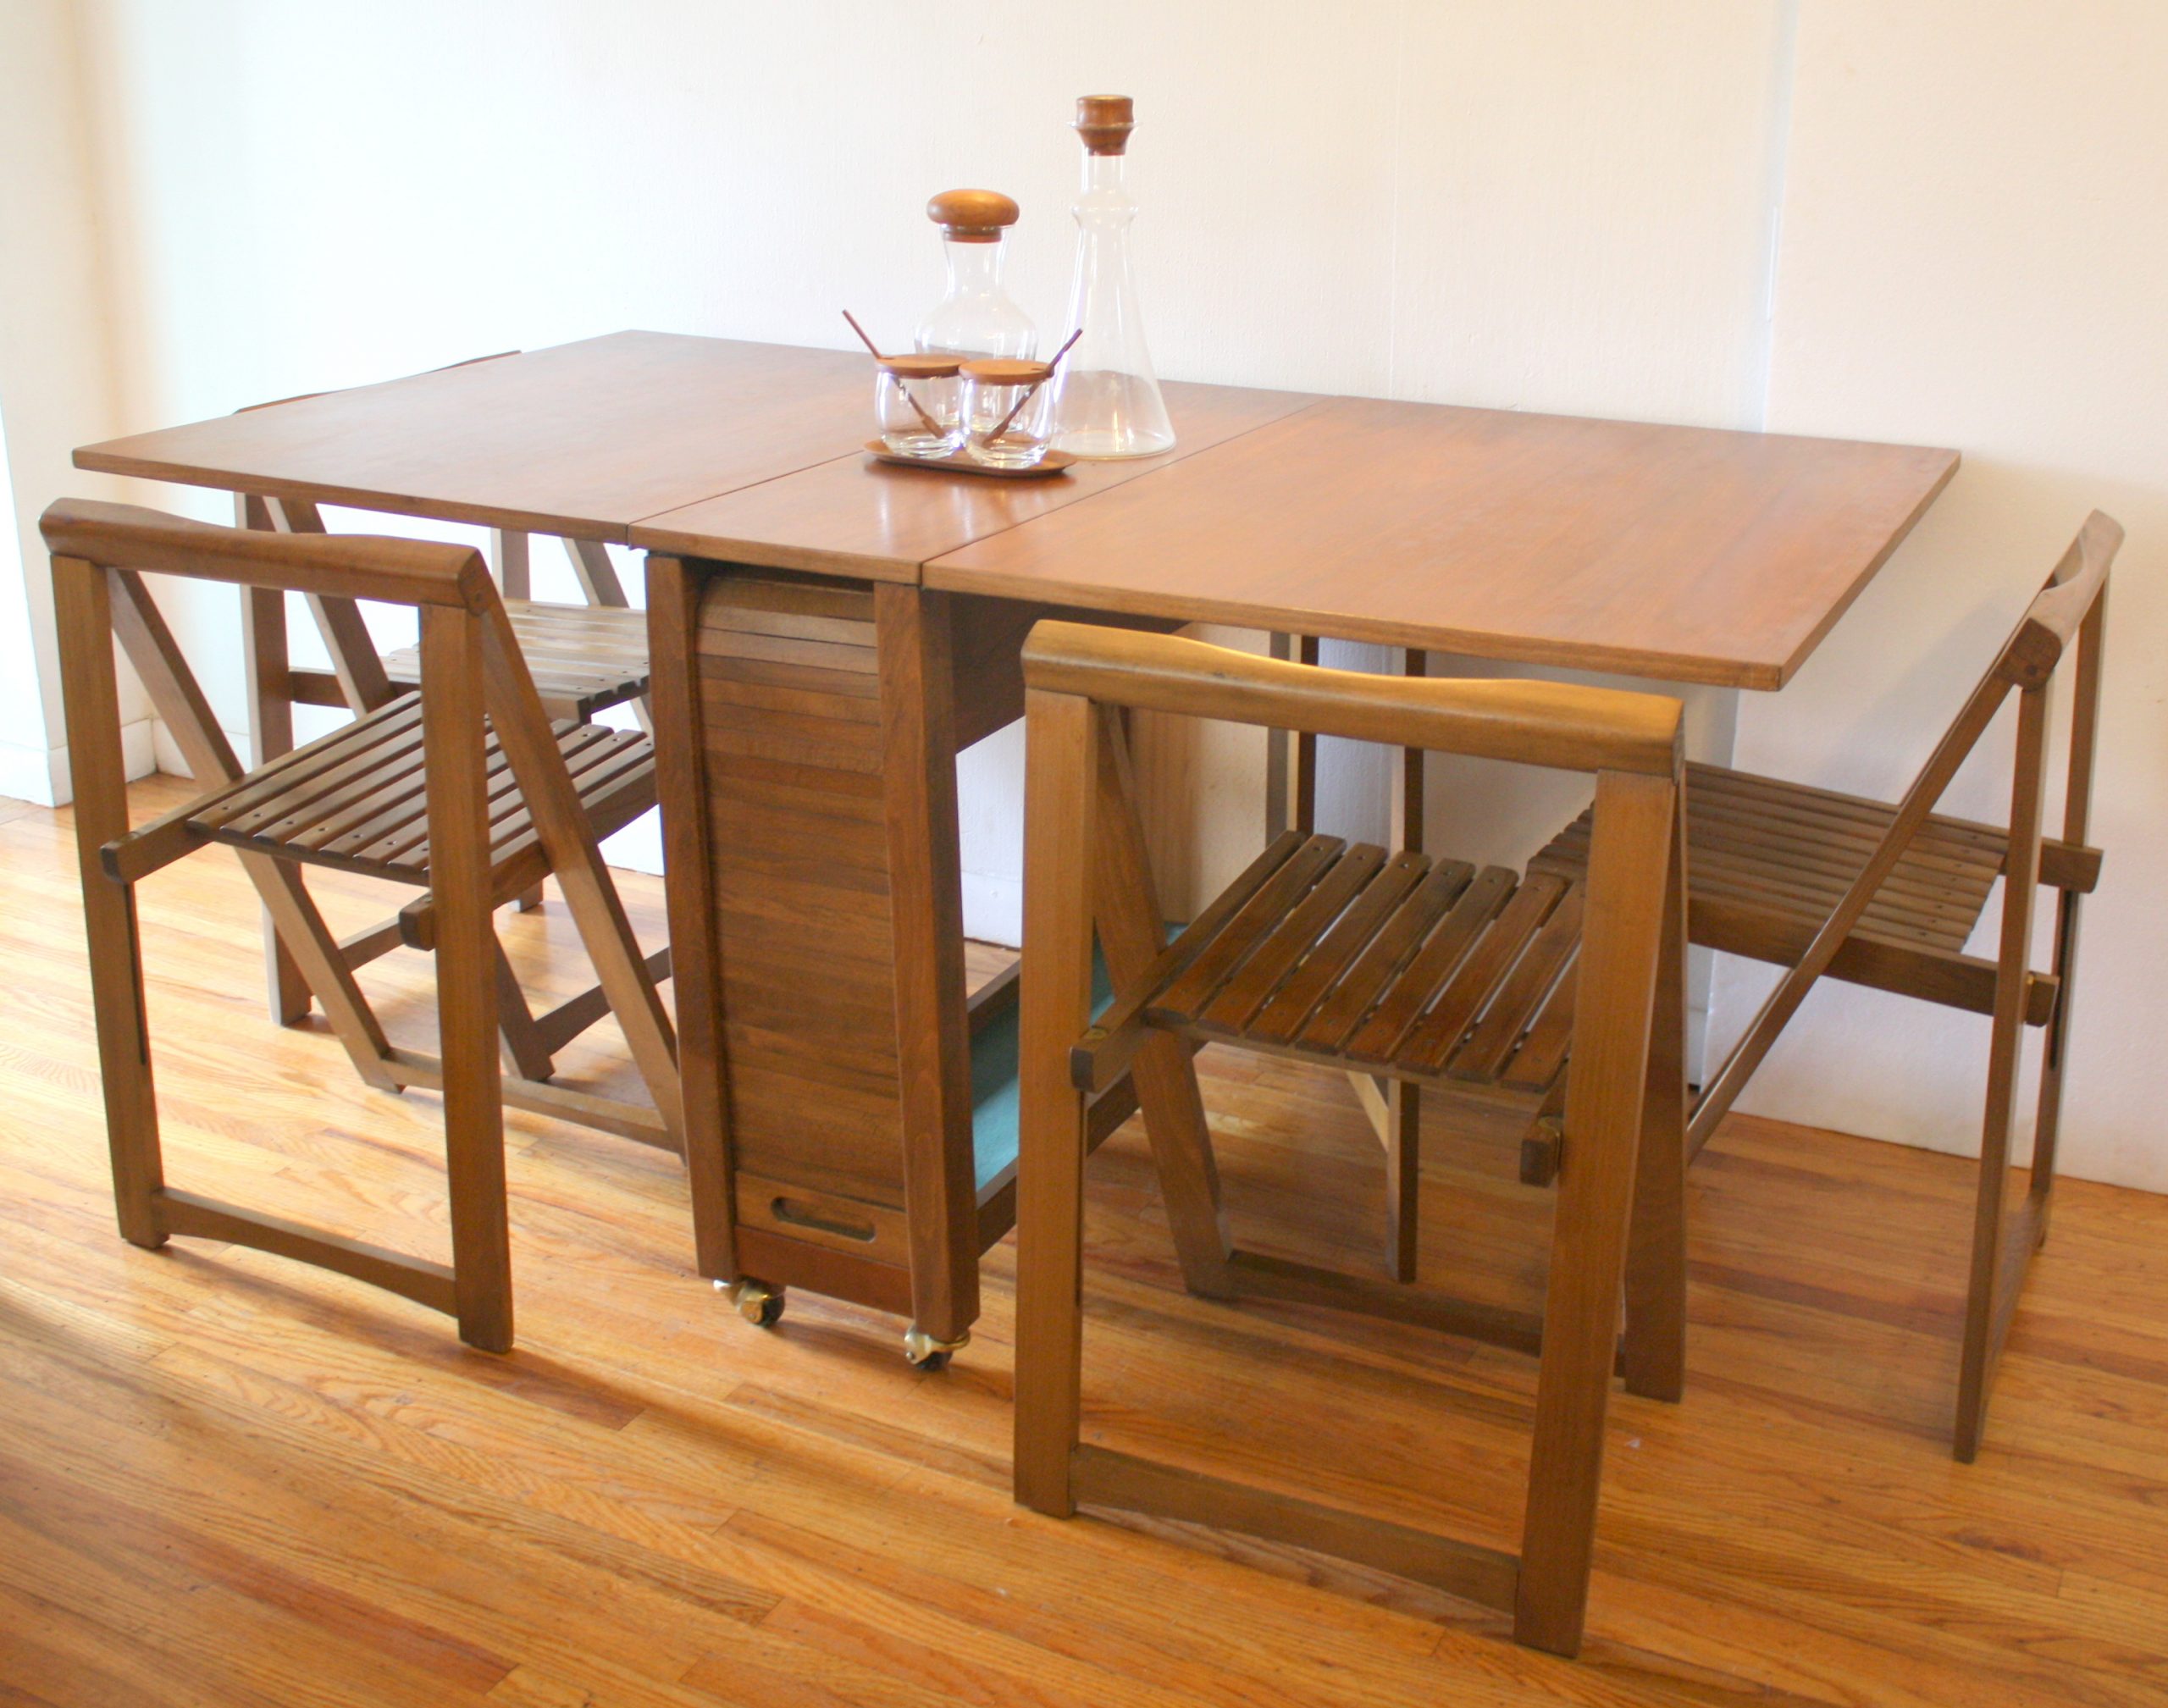 Mid Century Modern Gateleg Table With Folding Chairs within sizing 3040 X 2395